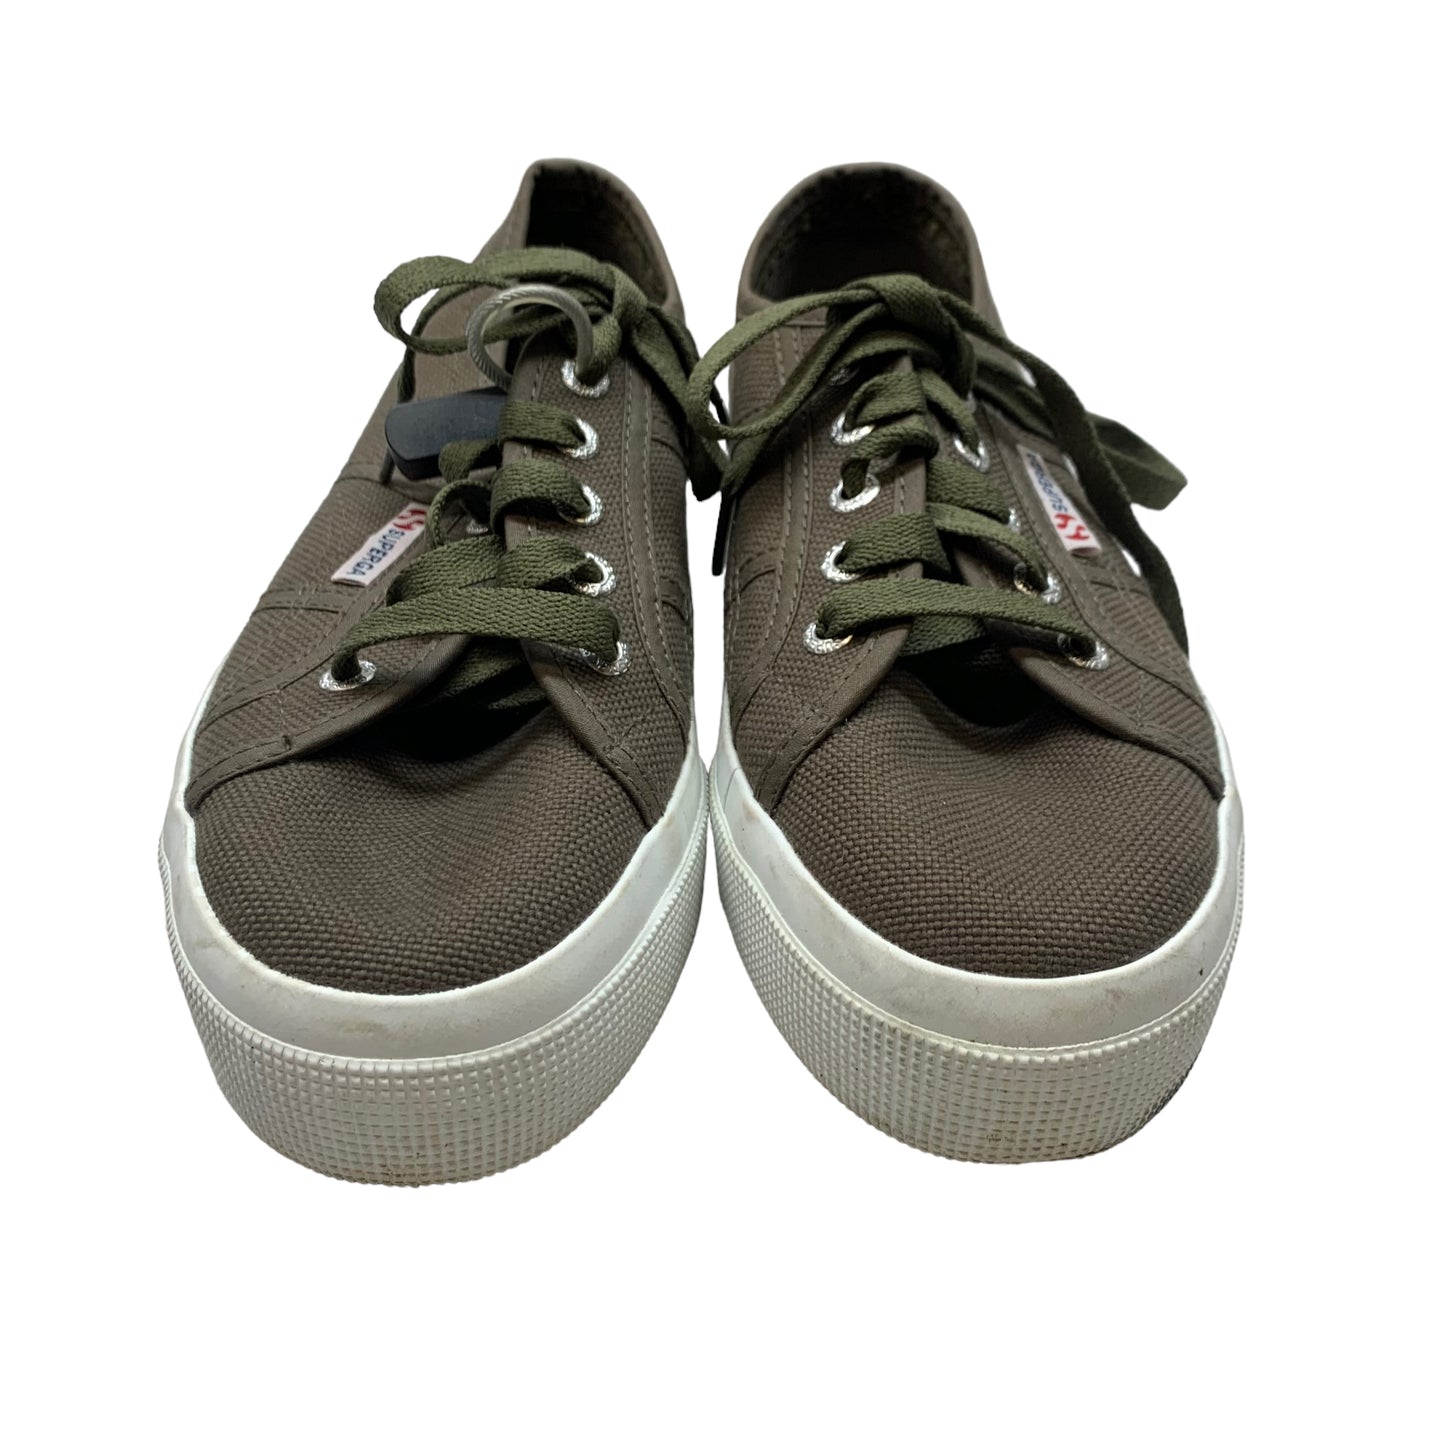 Shoes Sneakers By Superga  Size: 7.5